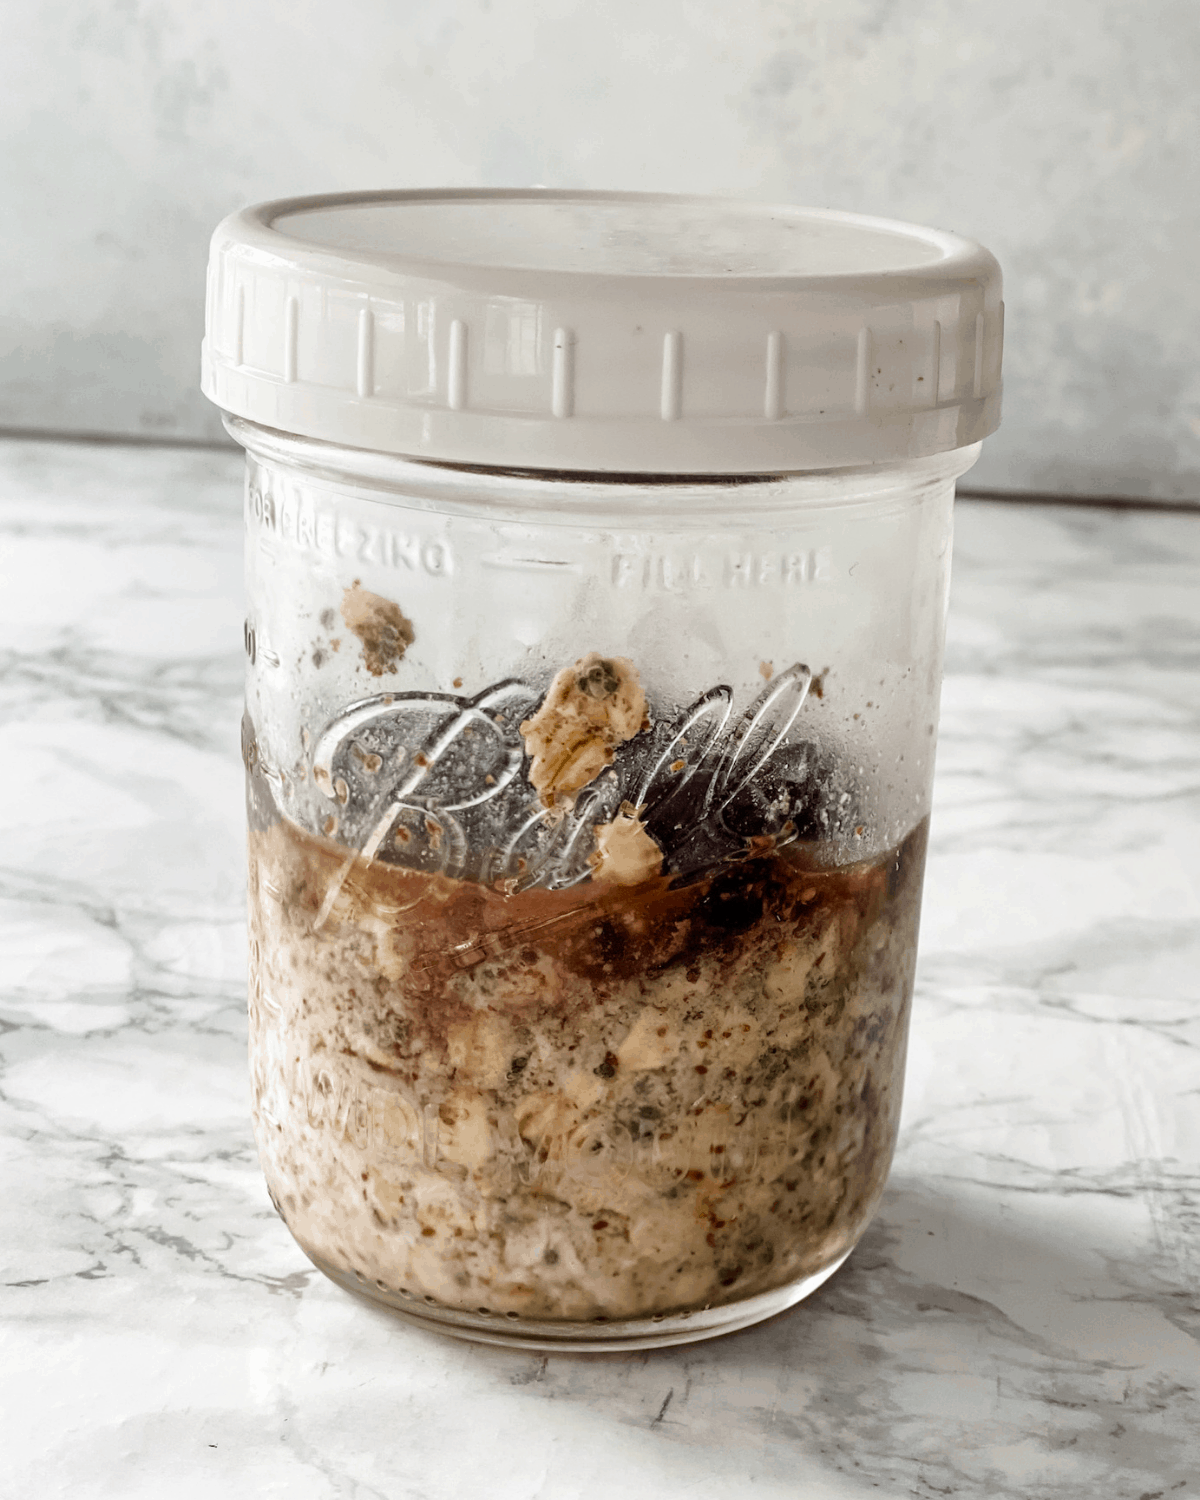 The ingredients for cherry overnight oats in a jar.